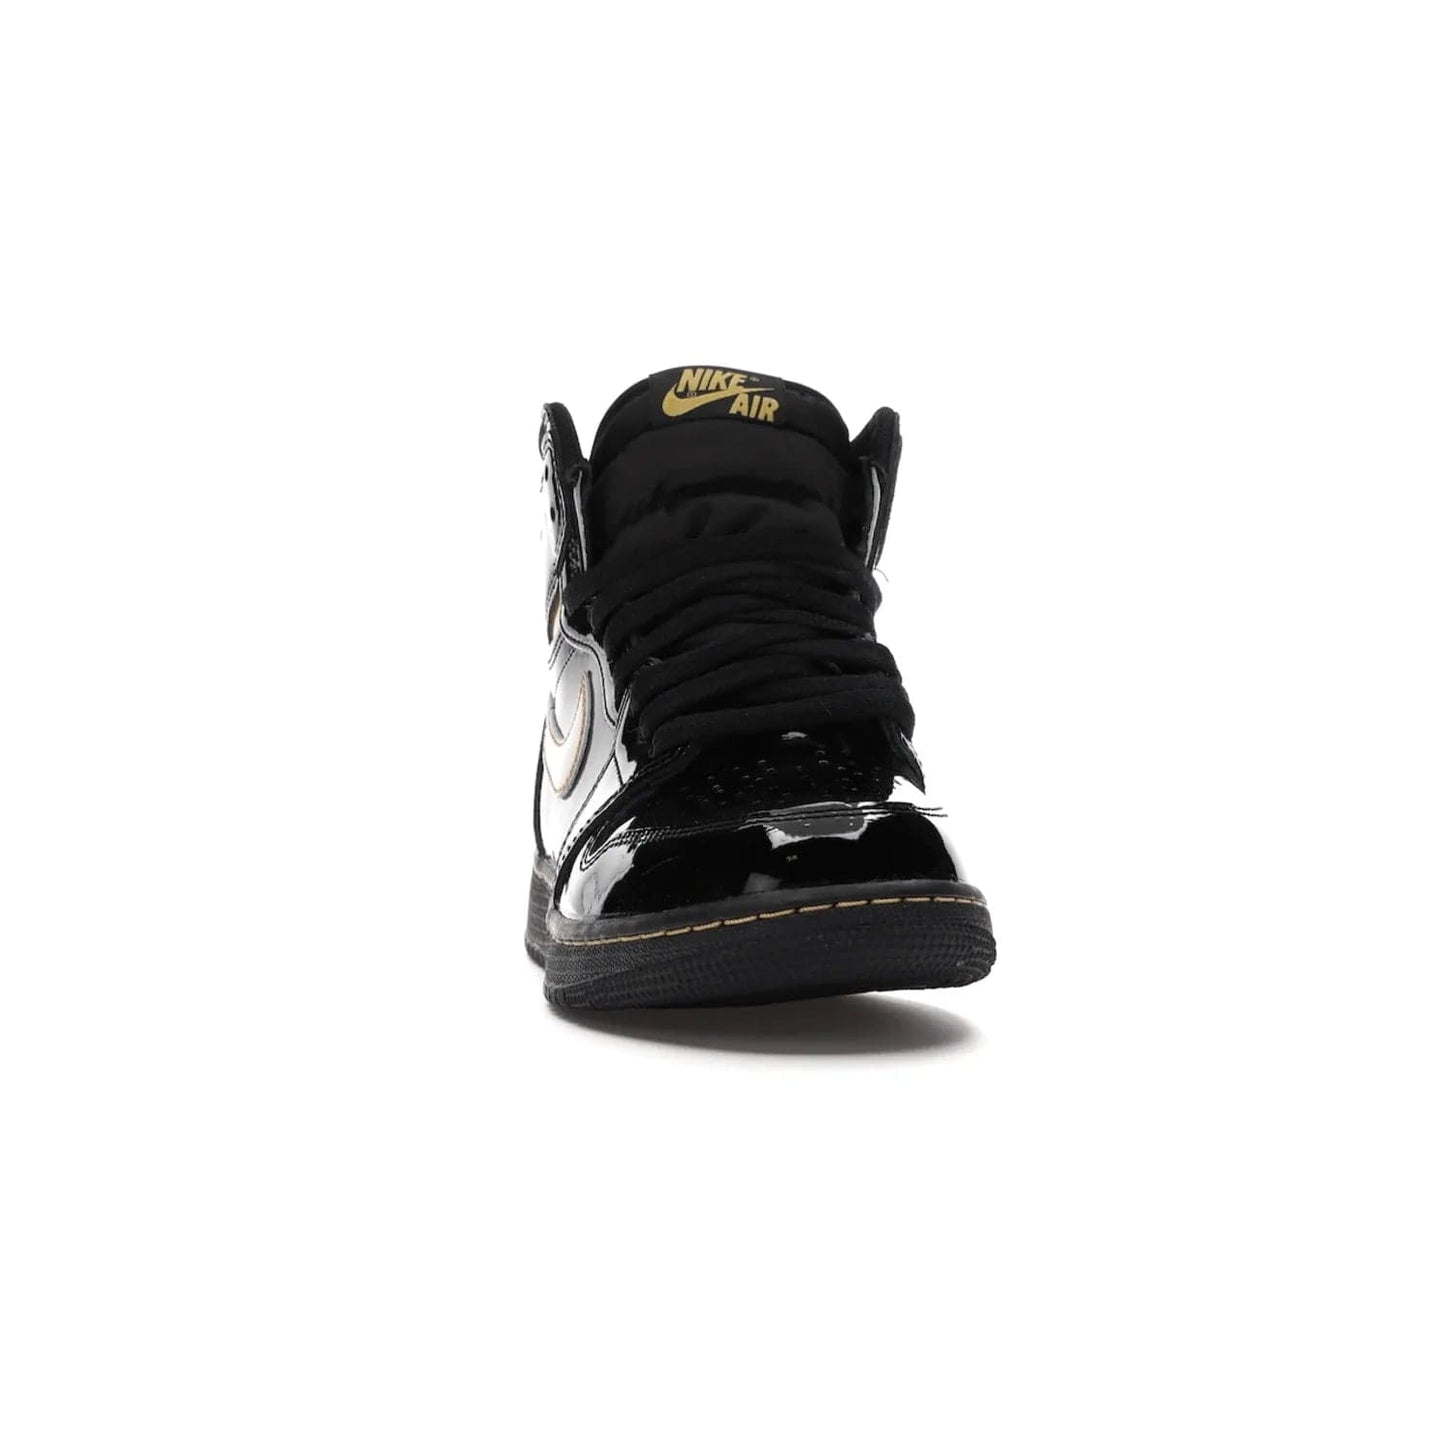 Jordan 1 Retro High Black Metallic Gold (2020) (GS) - Image 9 - Only at www.BallersClubKickz.com - Shop the Kids Air Jordan 1 Retro High in Black Metallic Gold for a stylish and comfortable sneaker kids can love. Featuring black and metallic gold patent leather uppers, metallic gold accents, and an Air sole unit for extra cushioning.